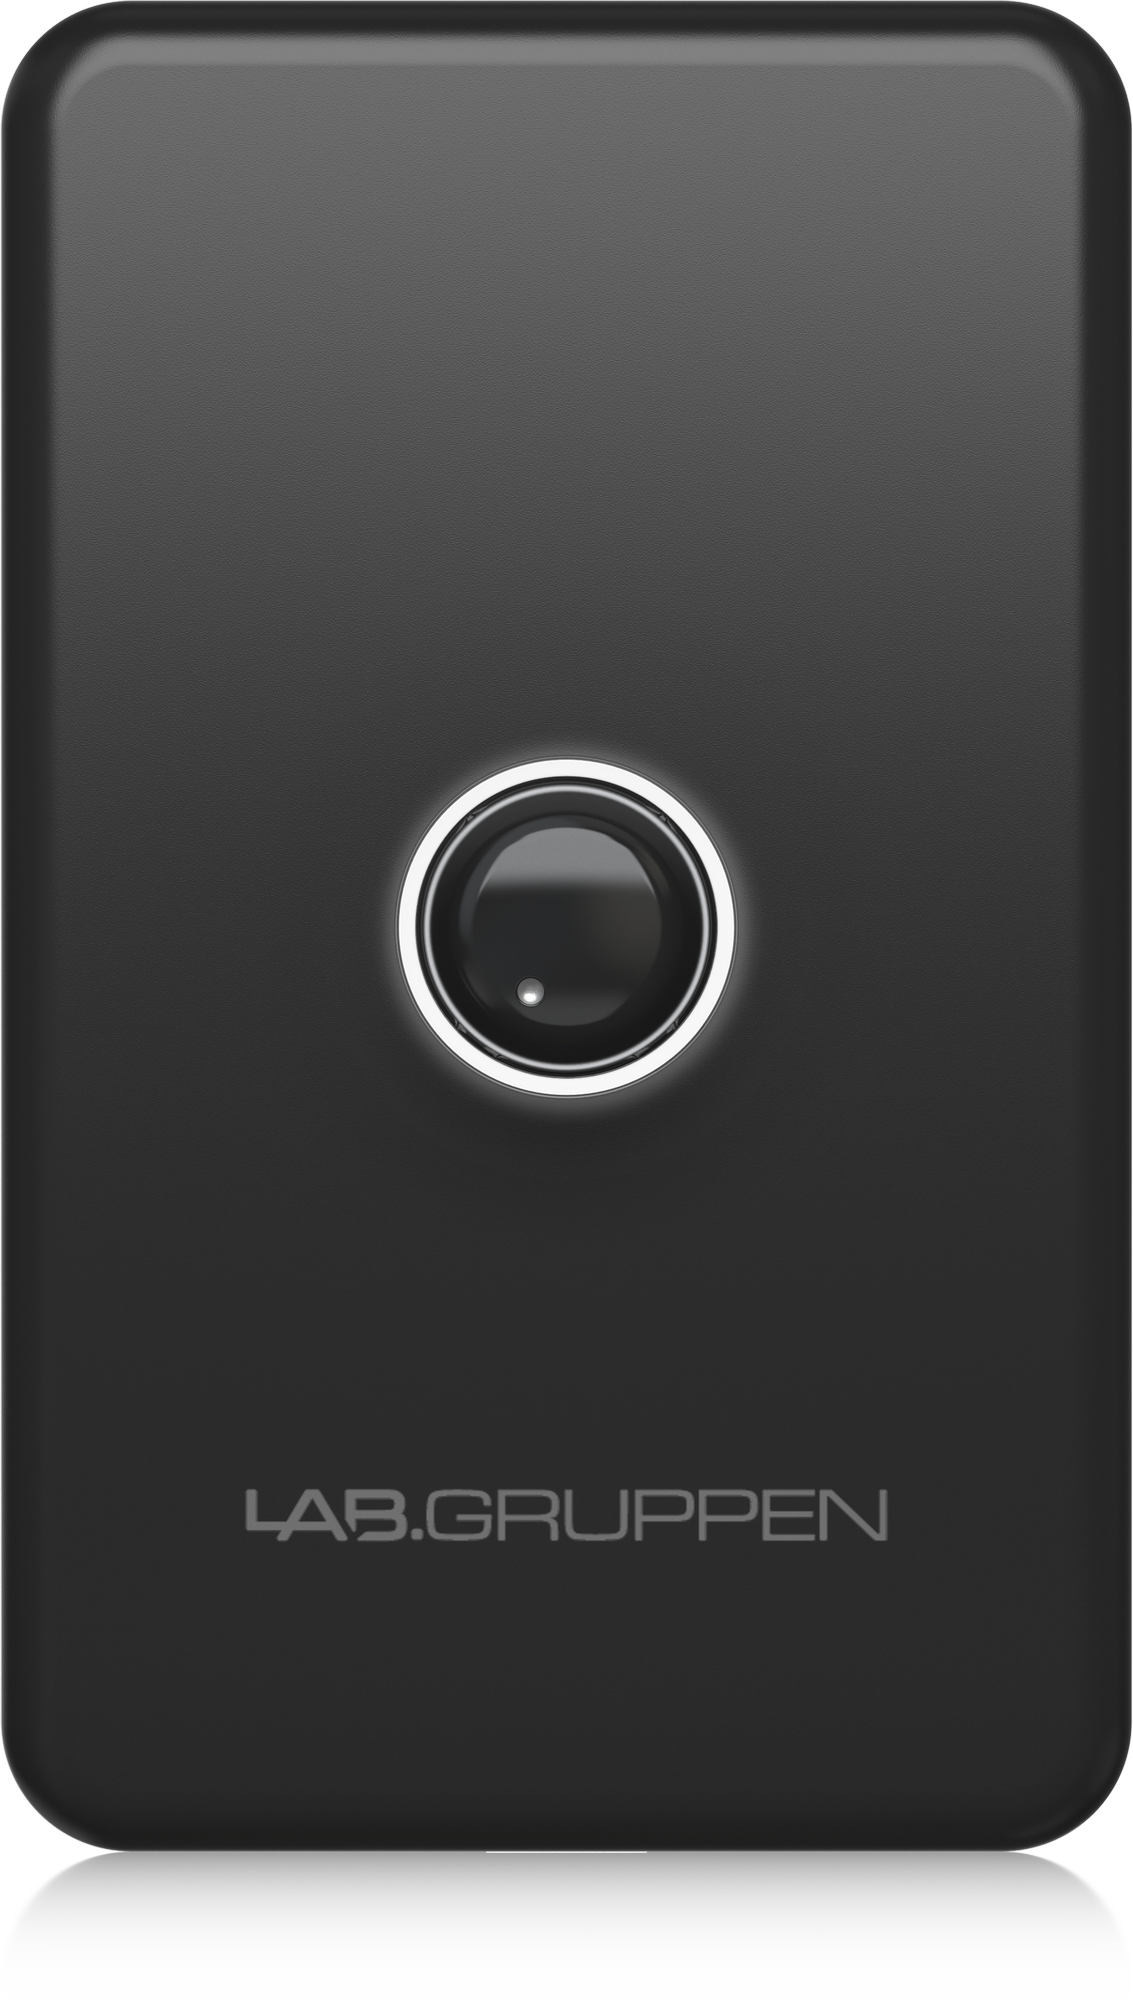 Lab Gruppen LAB-CRC-VUL-BK Wall-Mount Volume Control in Single-Gang Format for CA, CM, CMA and CPA Series